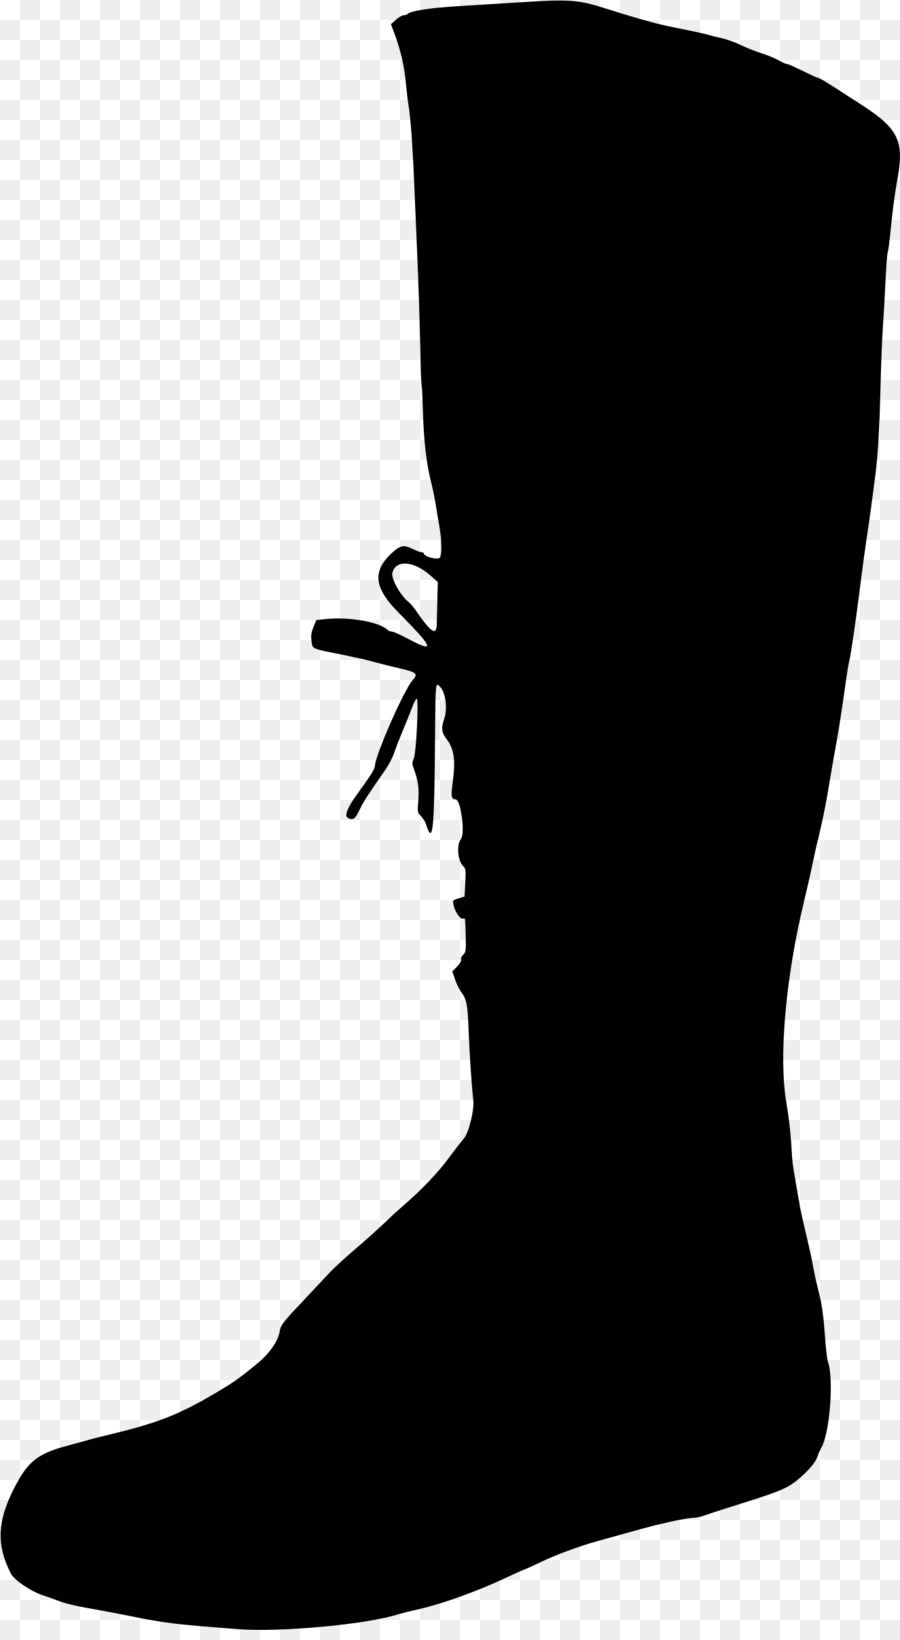 Shoe Silhouette Cowboy boot - boots clipart png download - 1325*2399 - Free Transparent Shoe png Download.